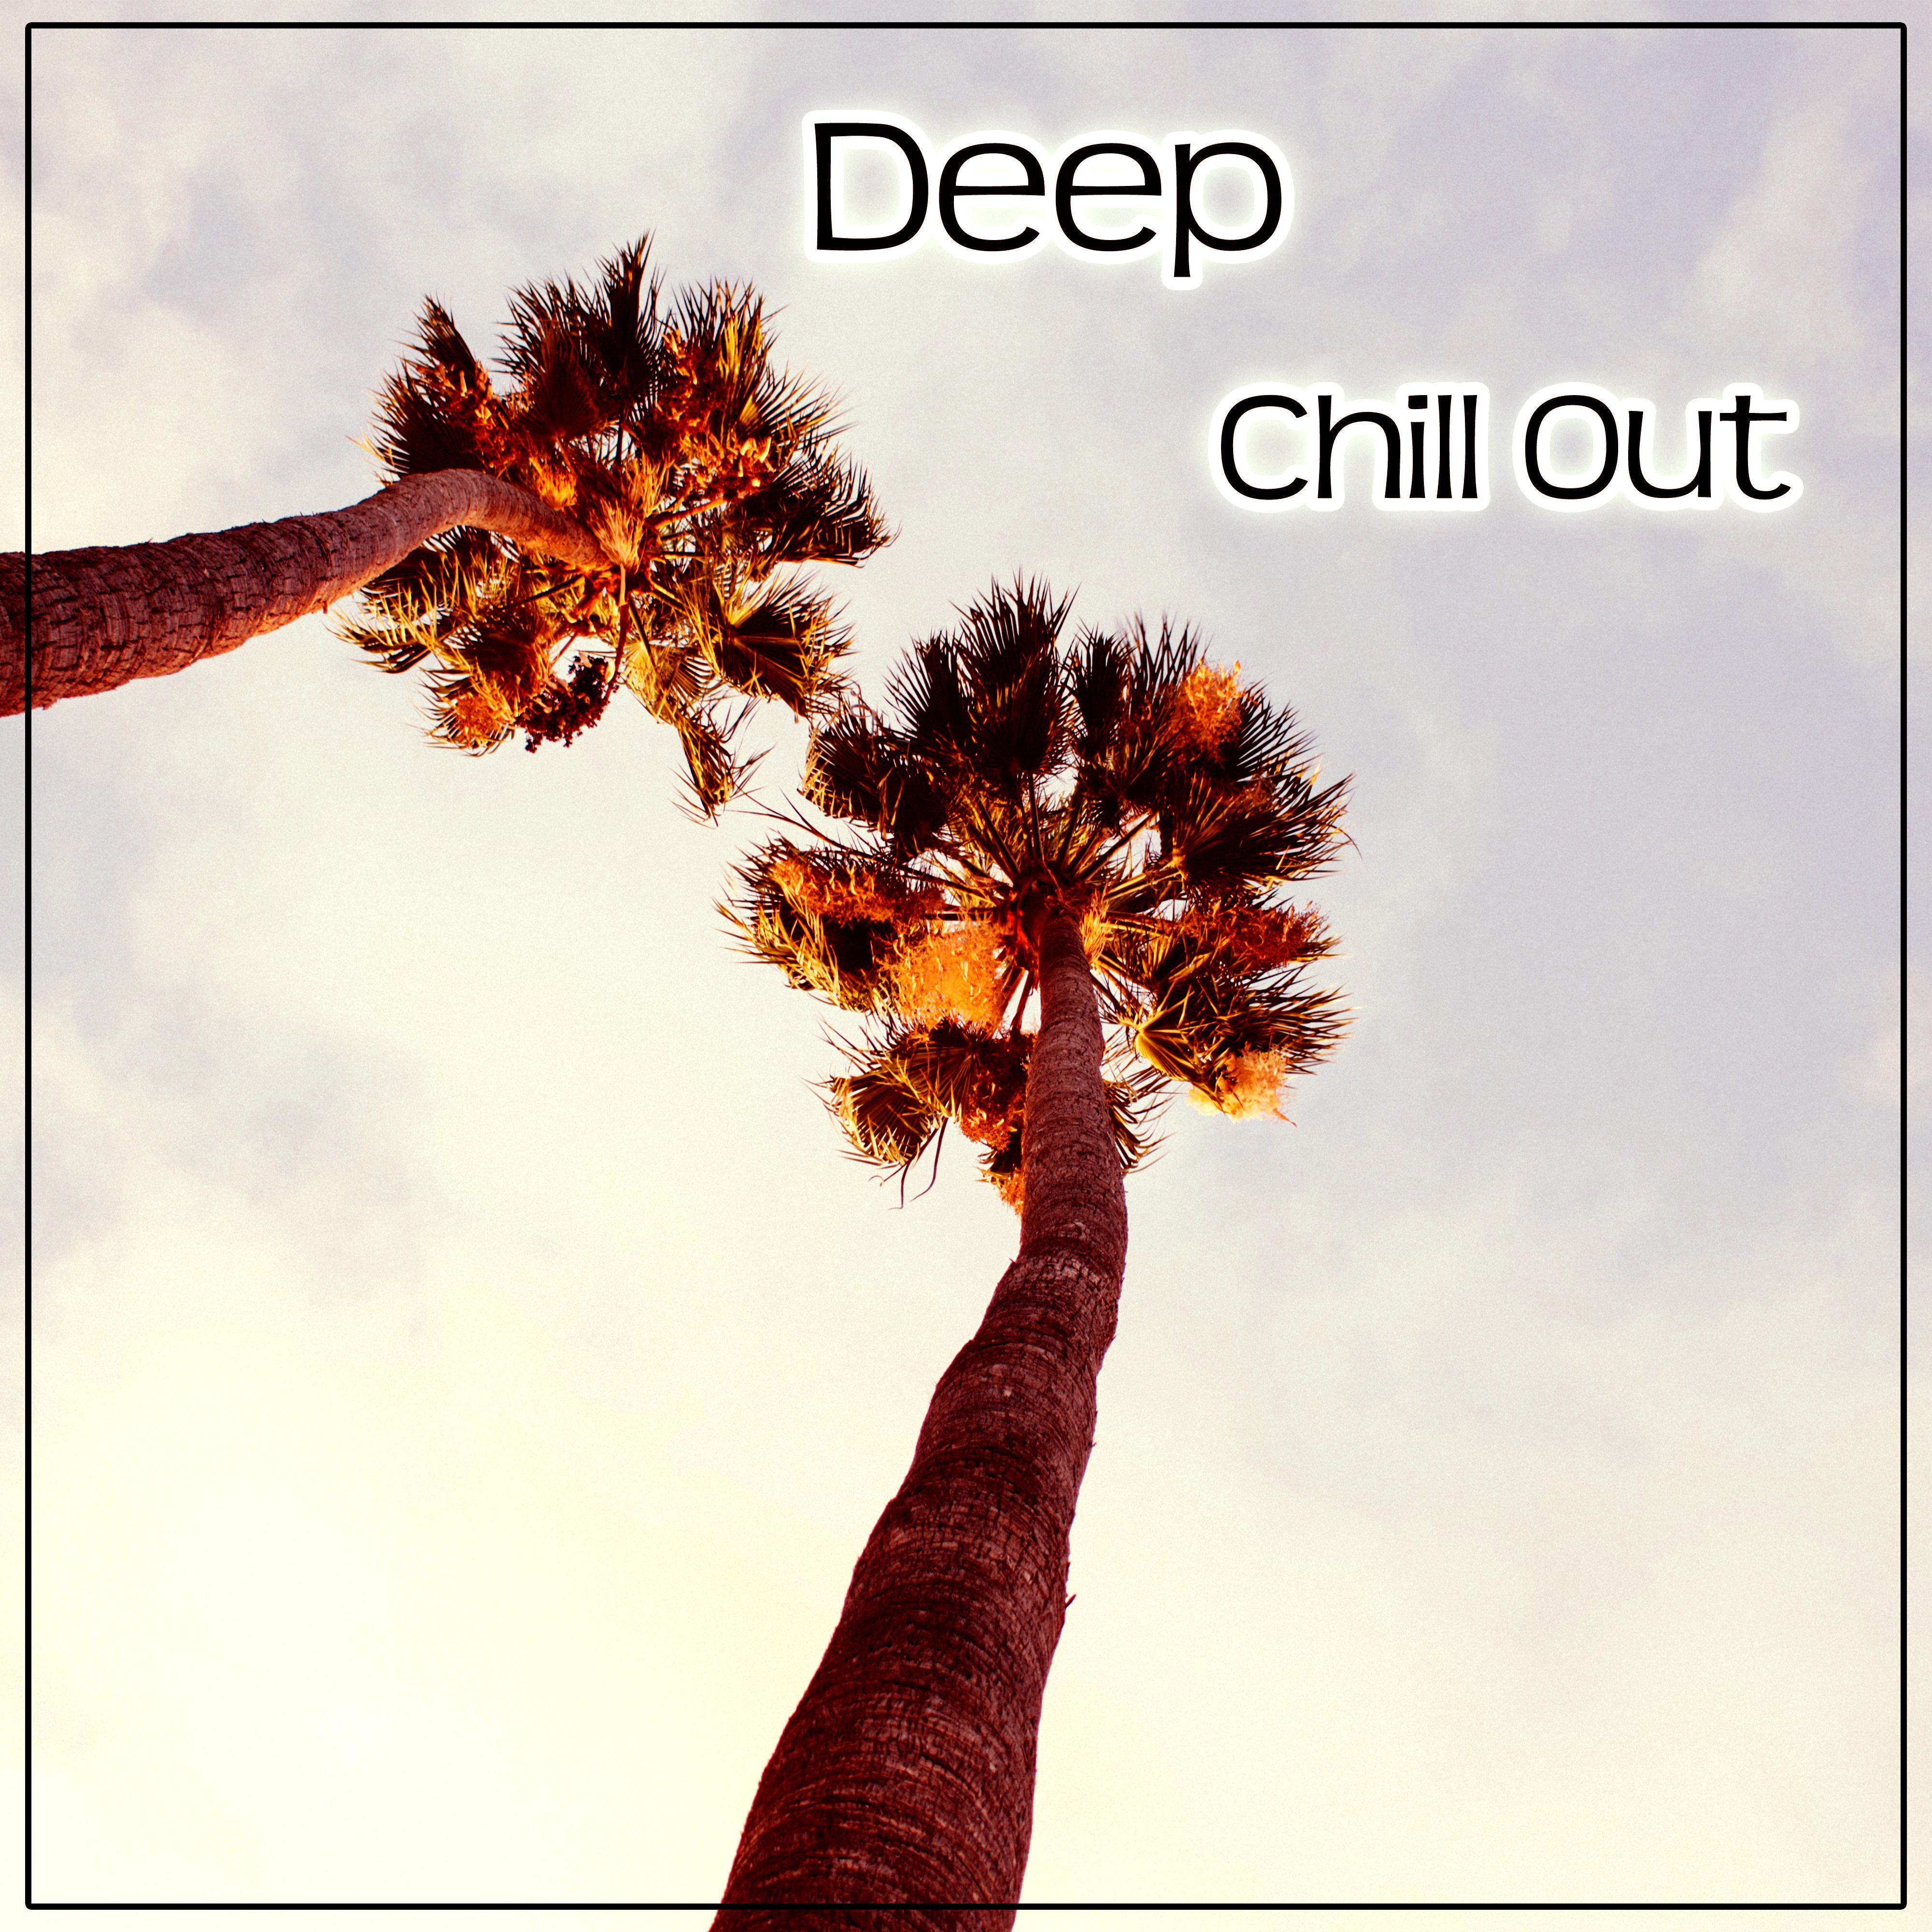 Deep Chill Out  Ambient Chill Out Music, Deep Lounge, Beach Party, Chilling, Summer Time, Dance Party, Ibiza Beach